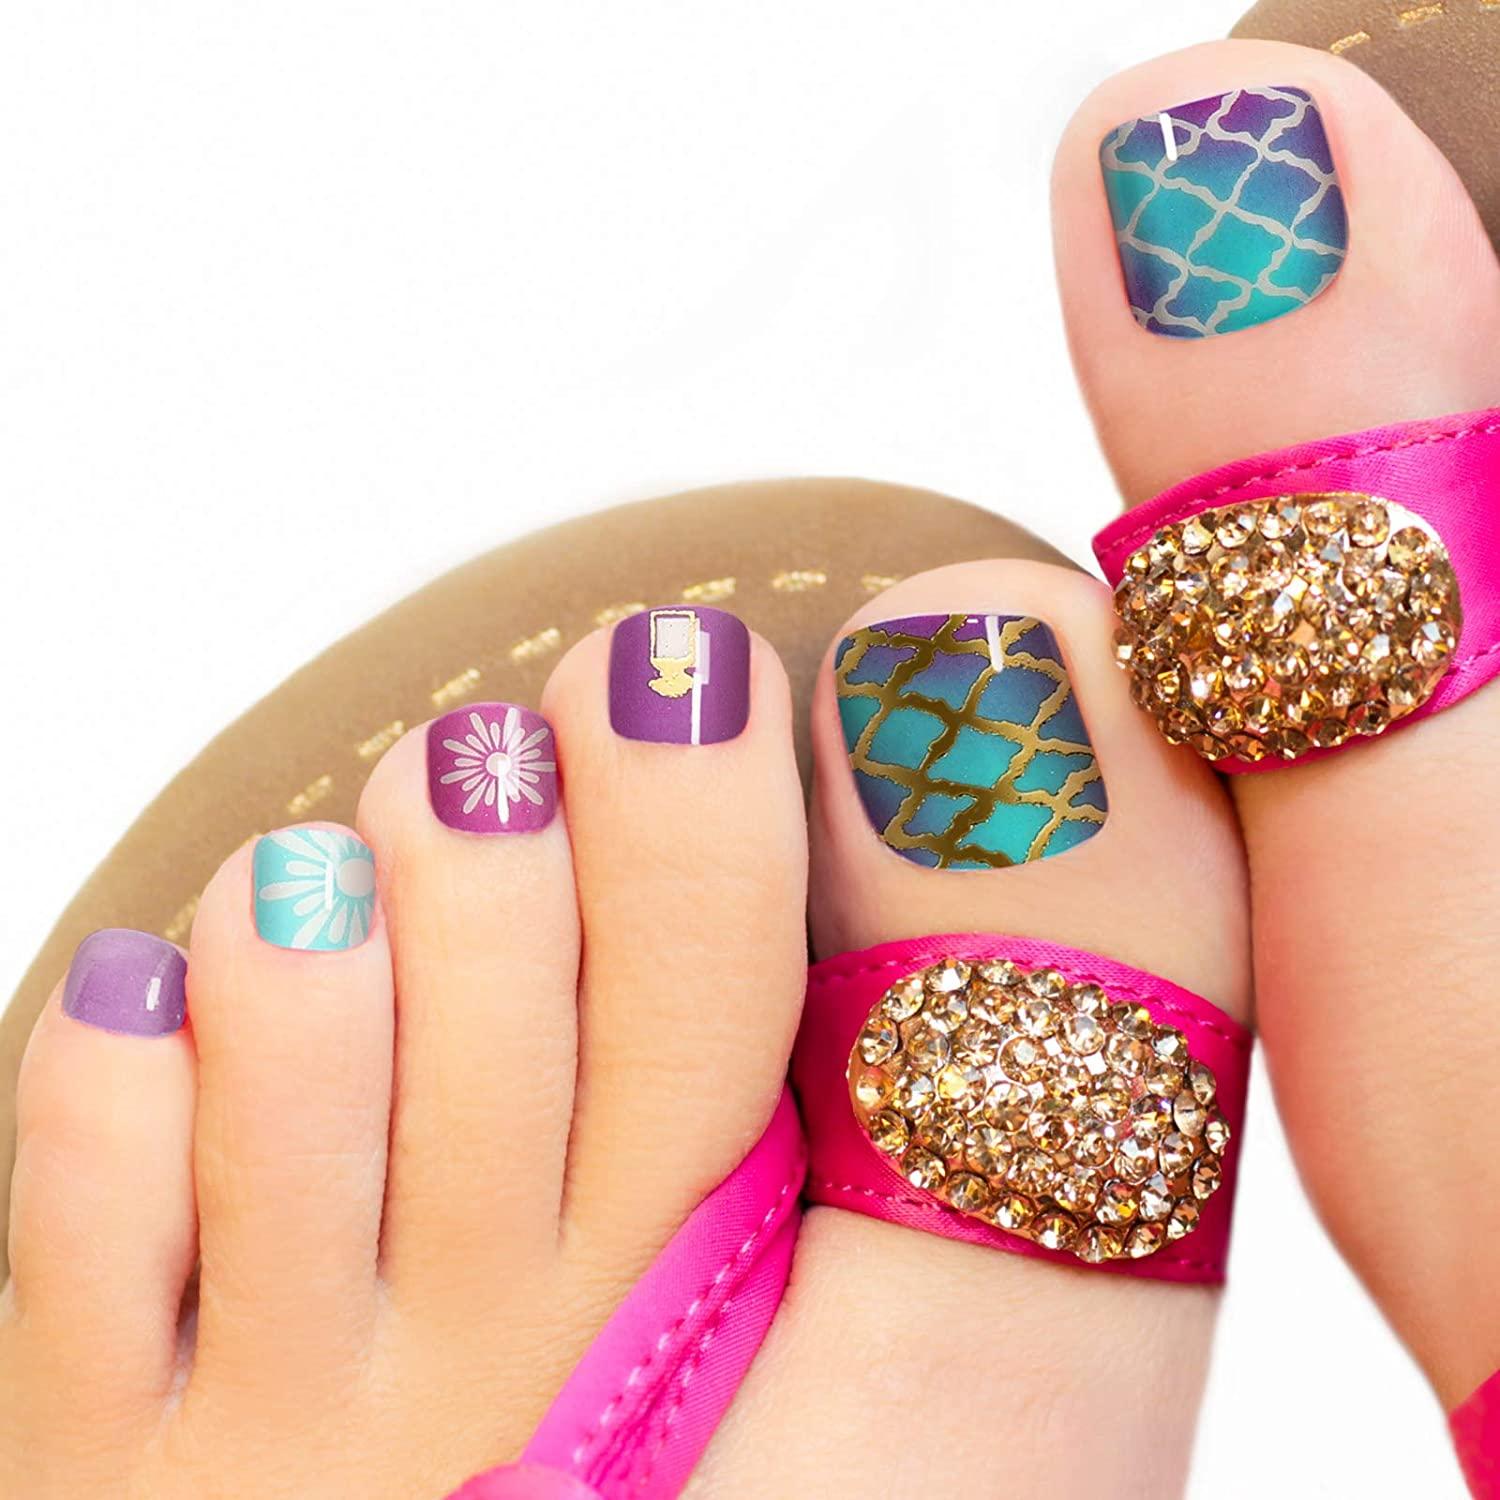 Get your toes out, girls! Harmlessly… - The Natural Health Hub